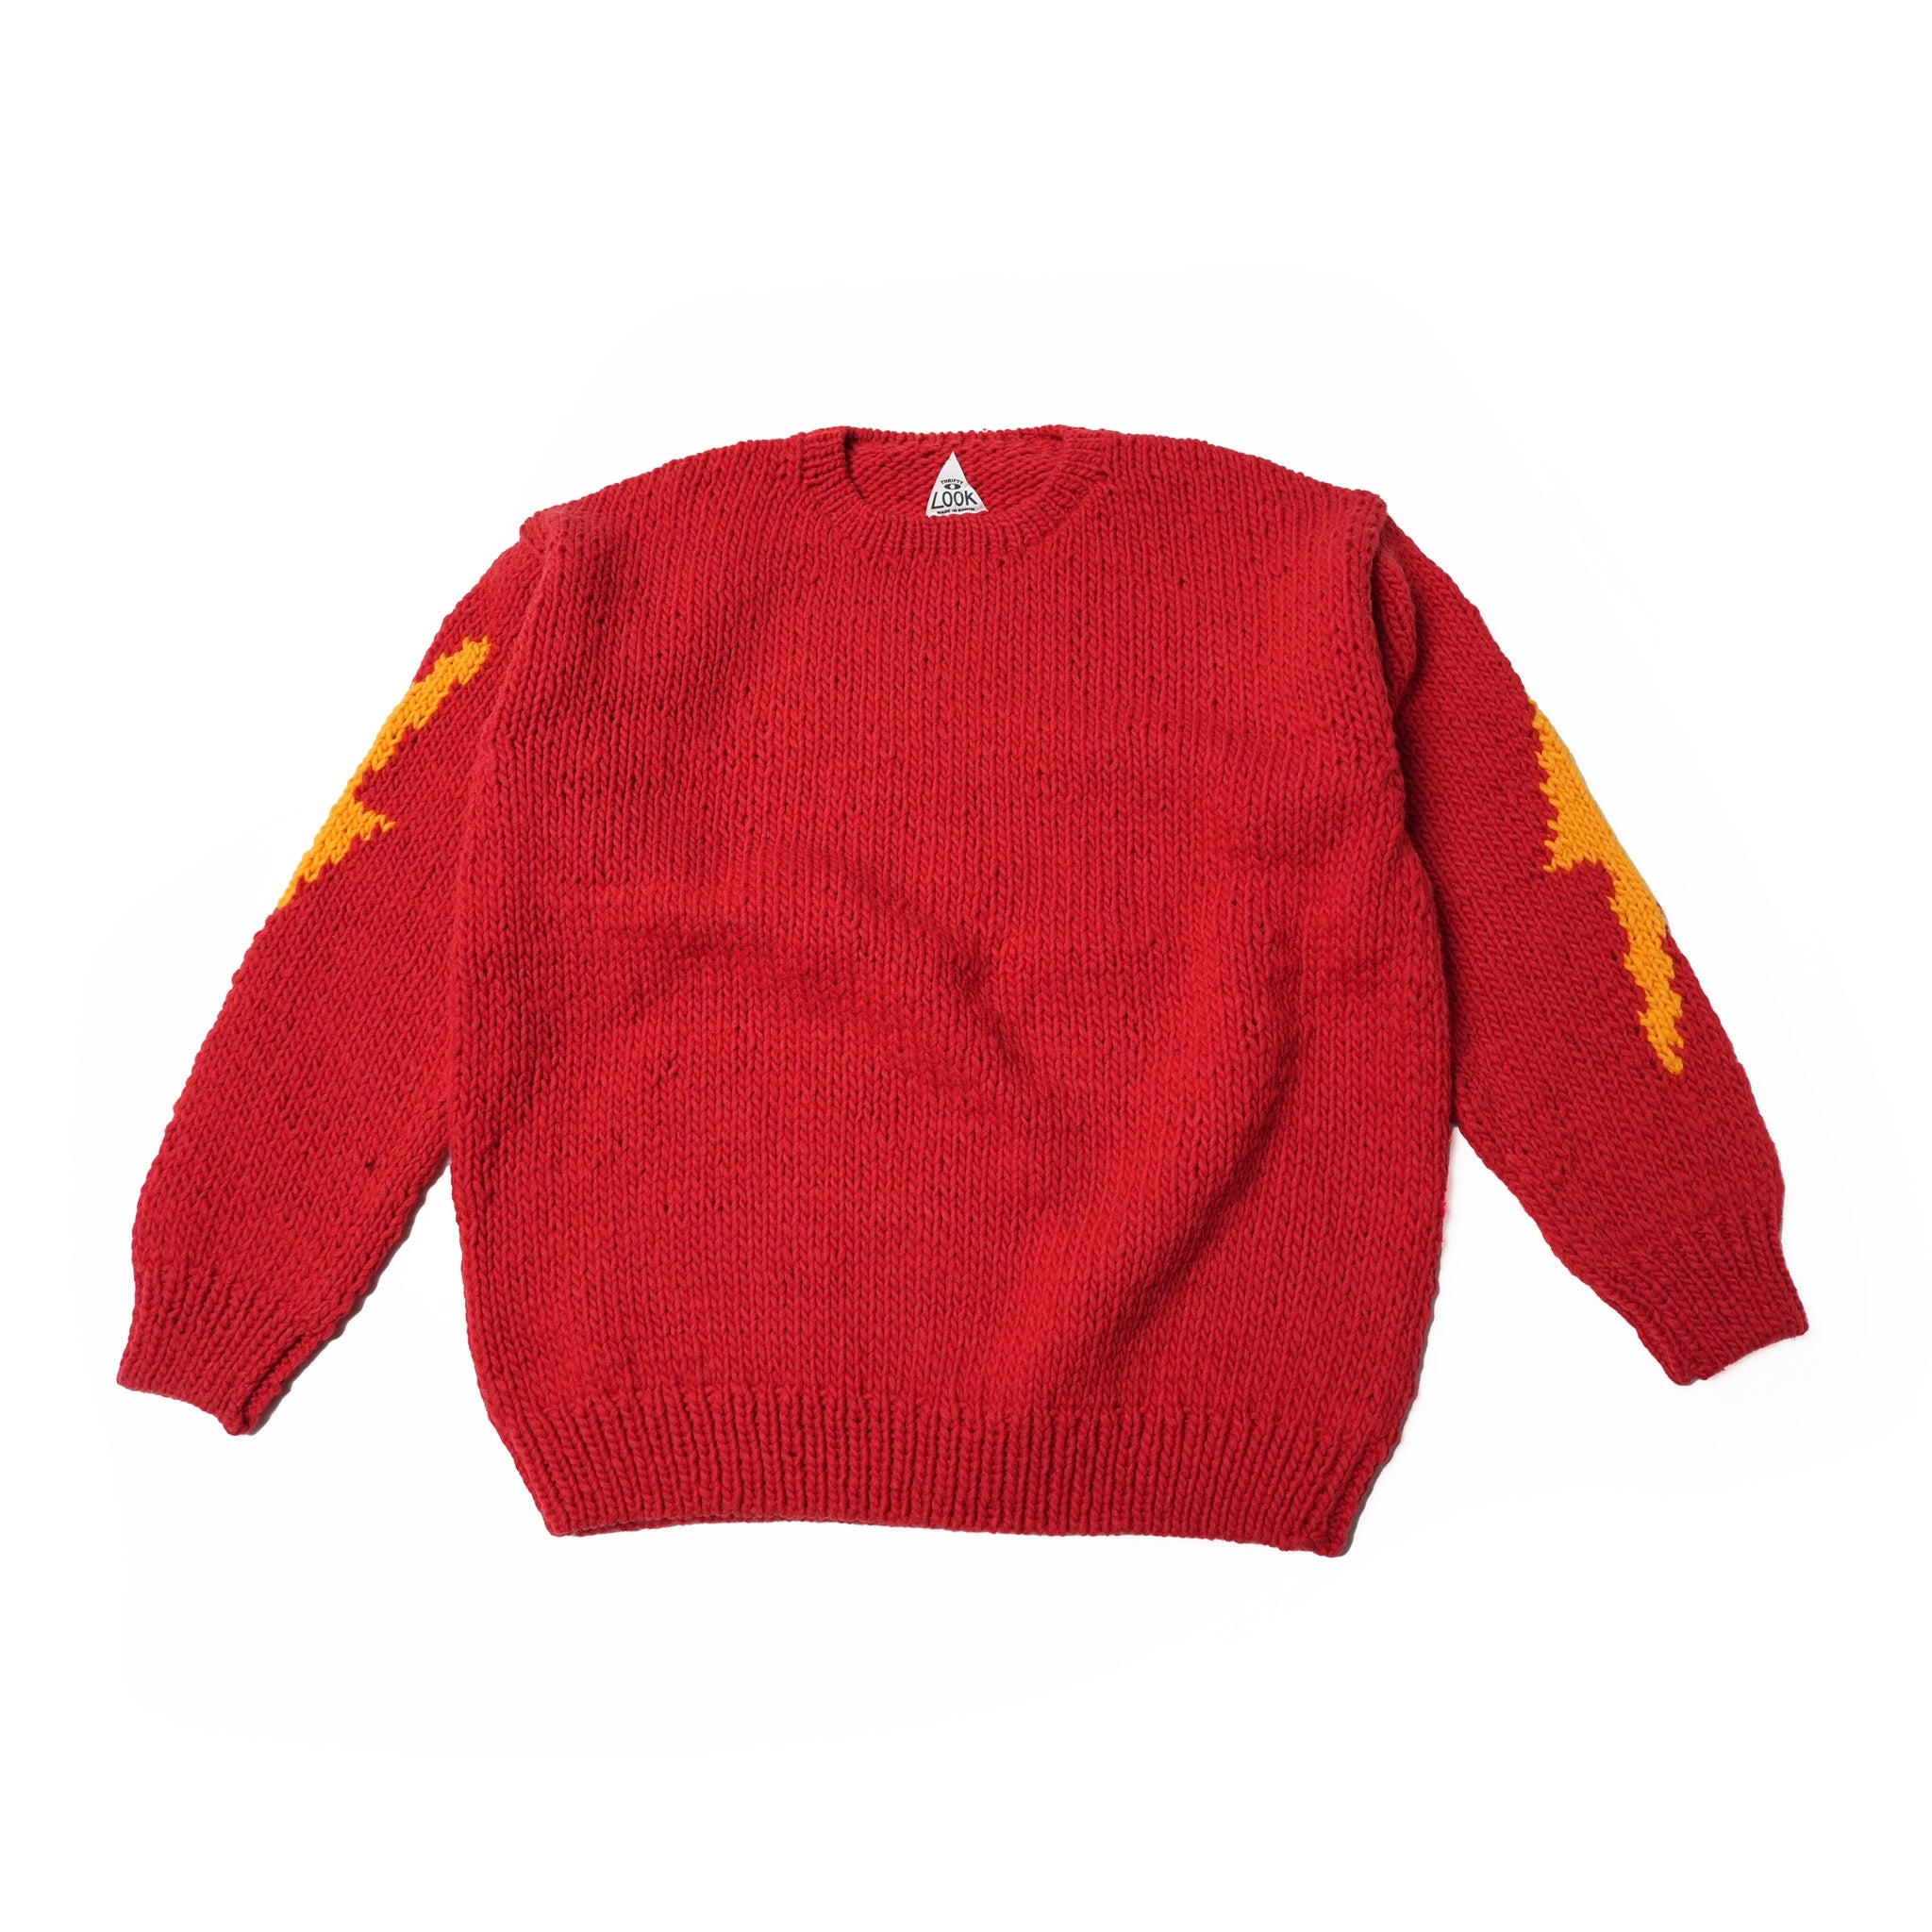 No:tl23f003b | Name:lightning hand knit crew | Color:Red【THRIFTY LOOK_スリフティールック】